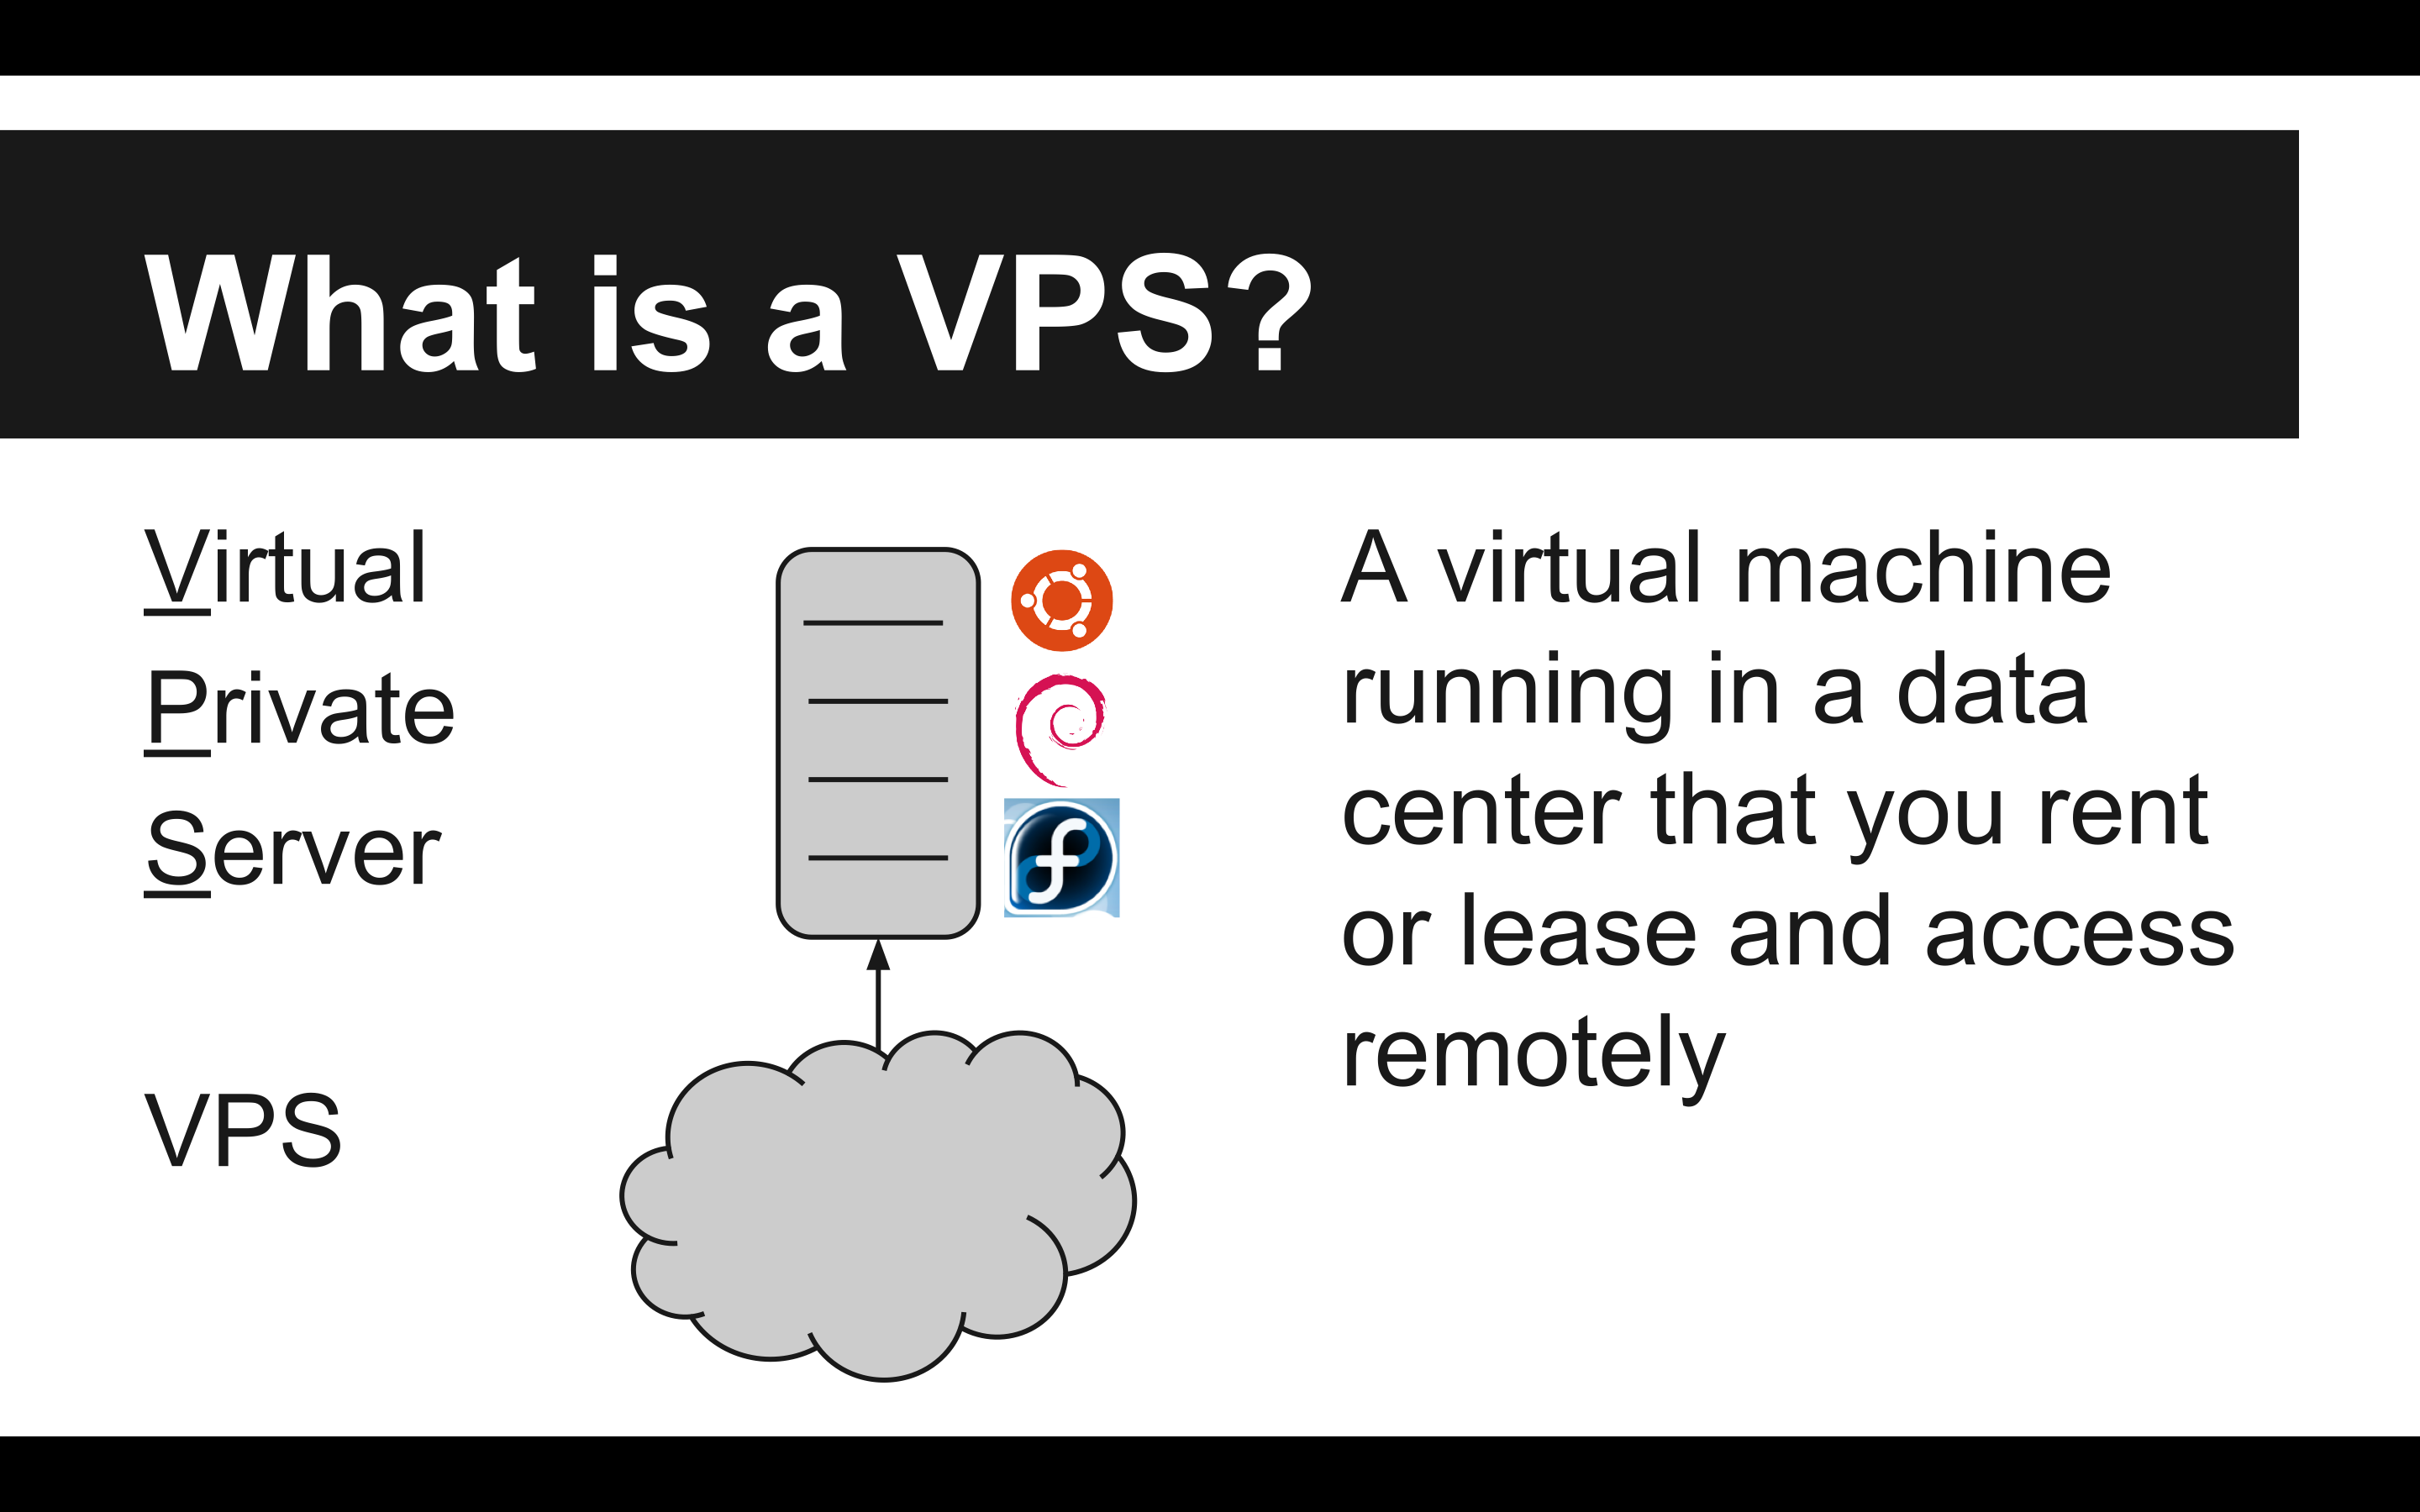 VPS stands for Virtual Private Server